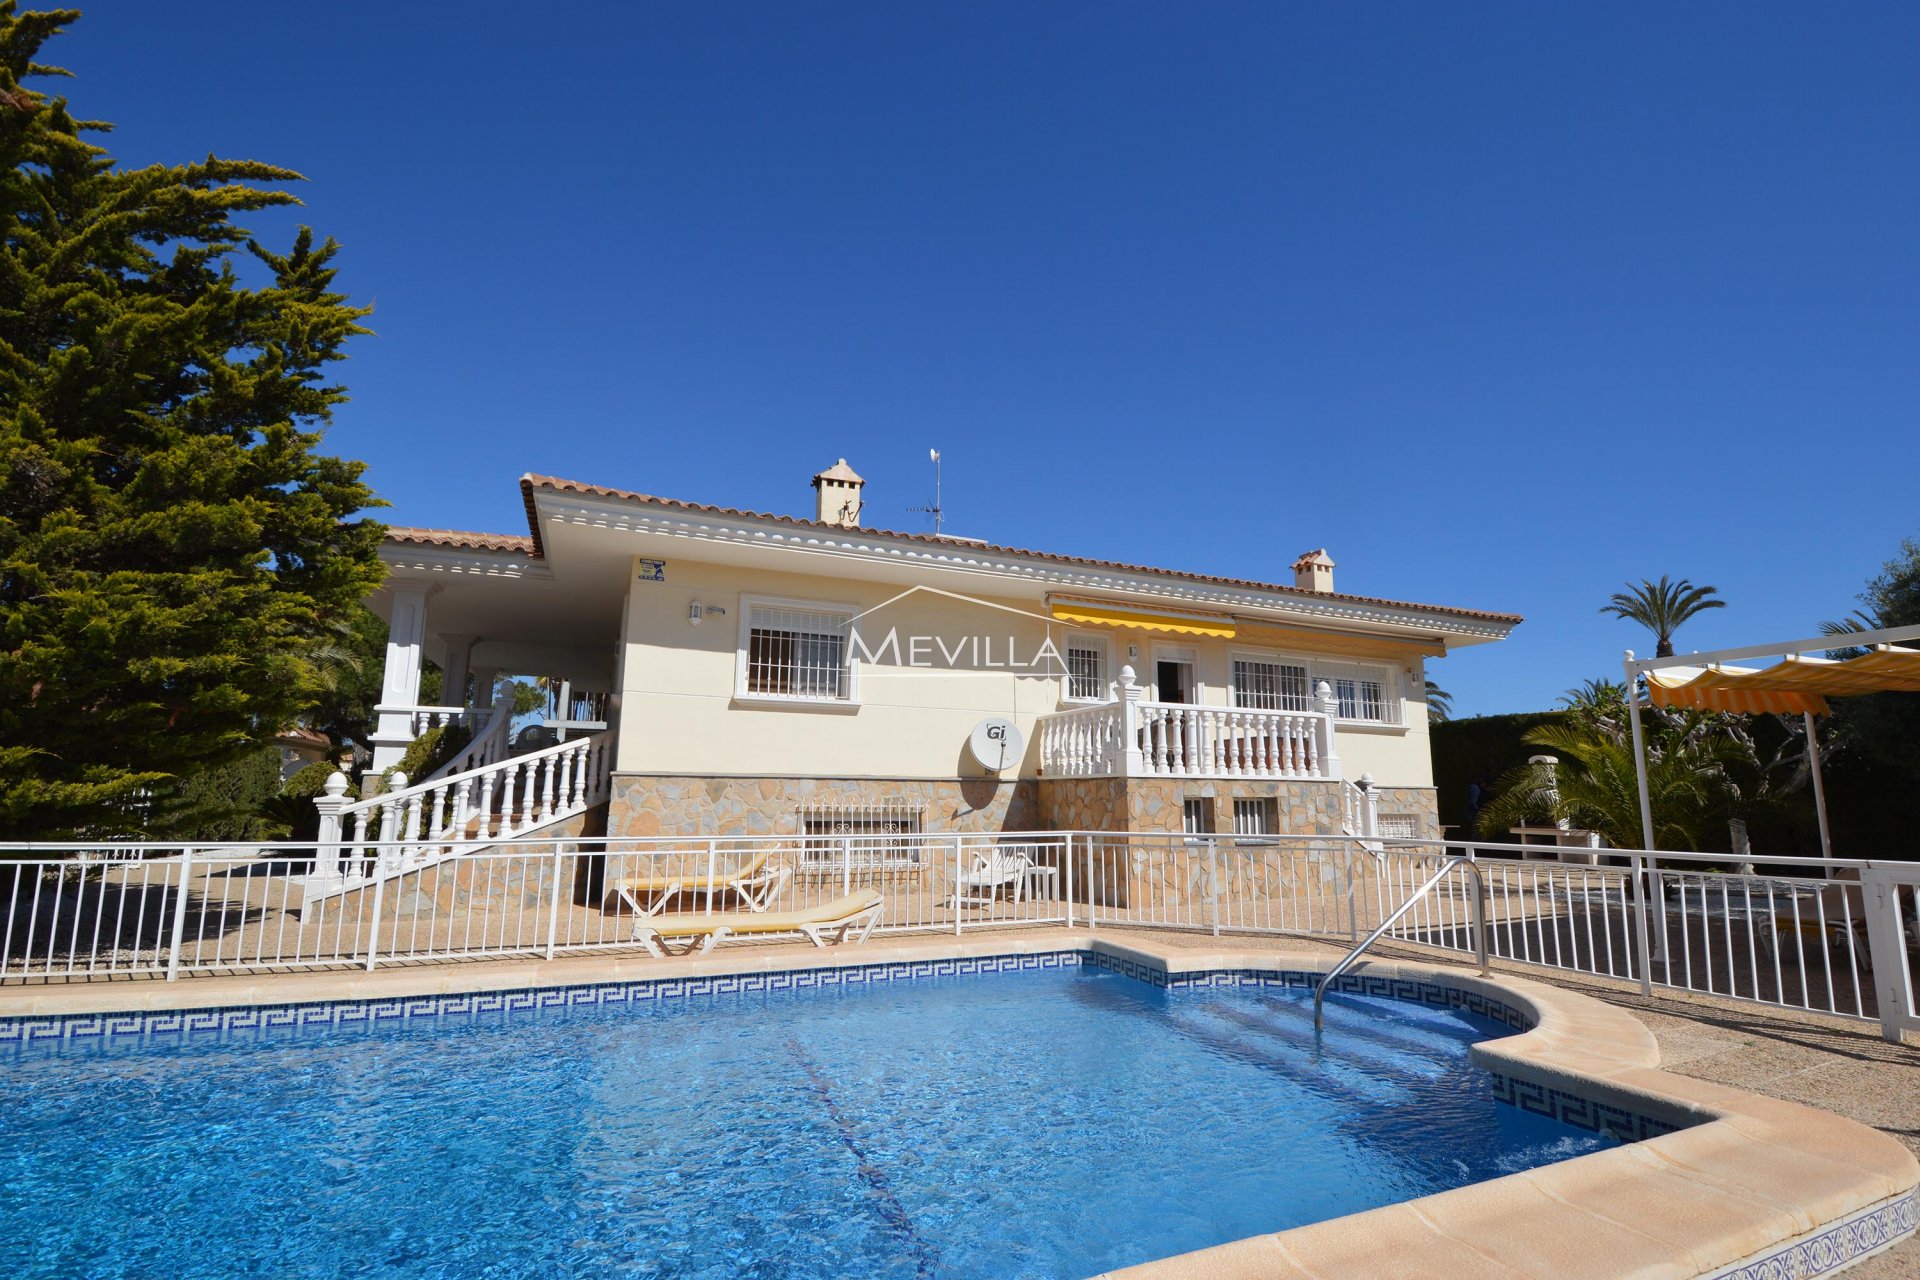 VILLA A FEW METERS FROM THE SEA IN CABO ROIG FOR SALE